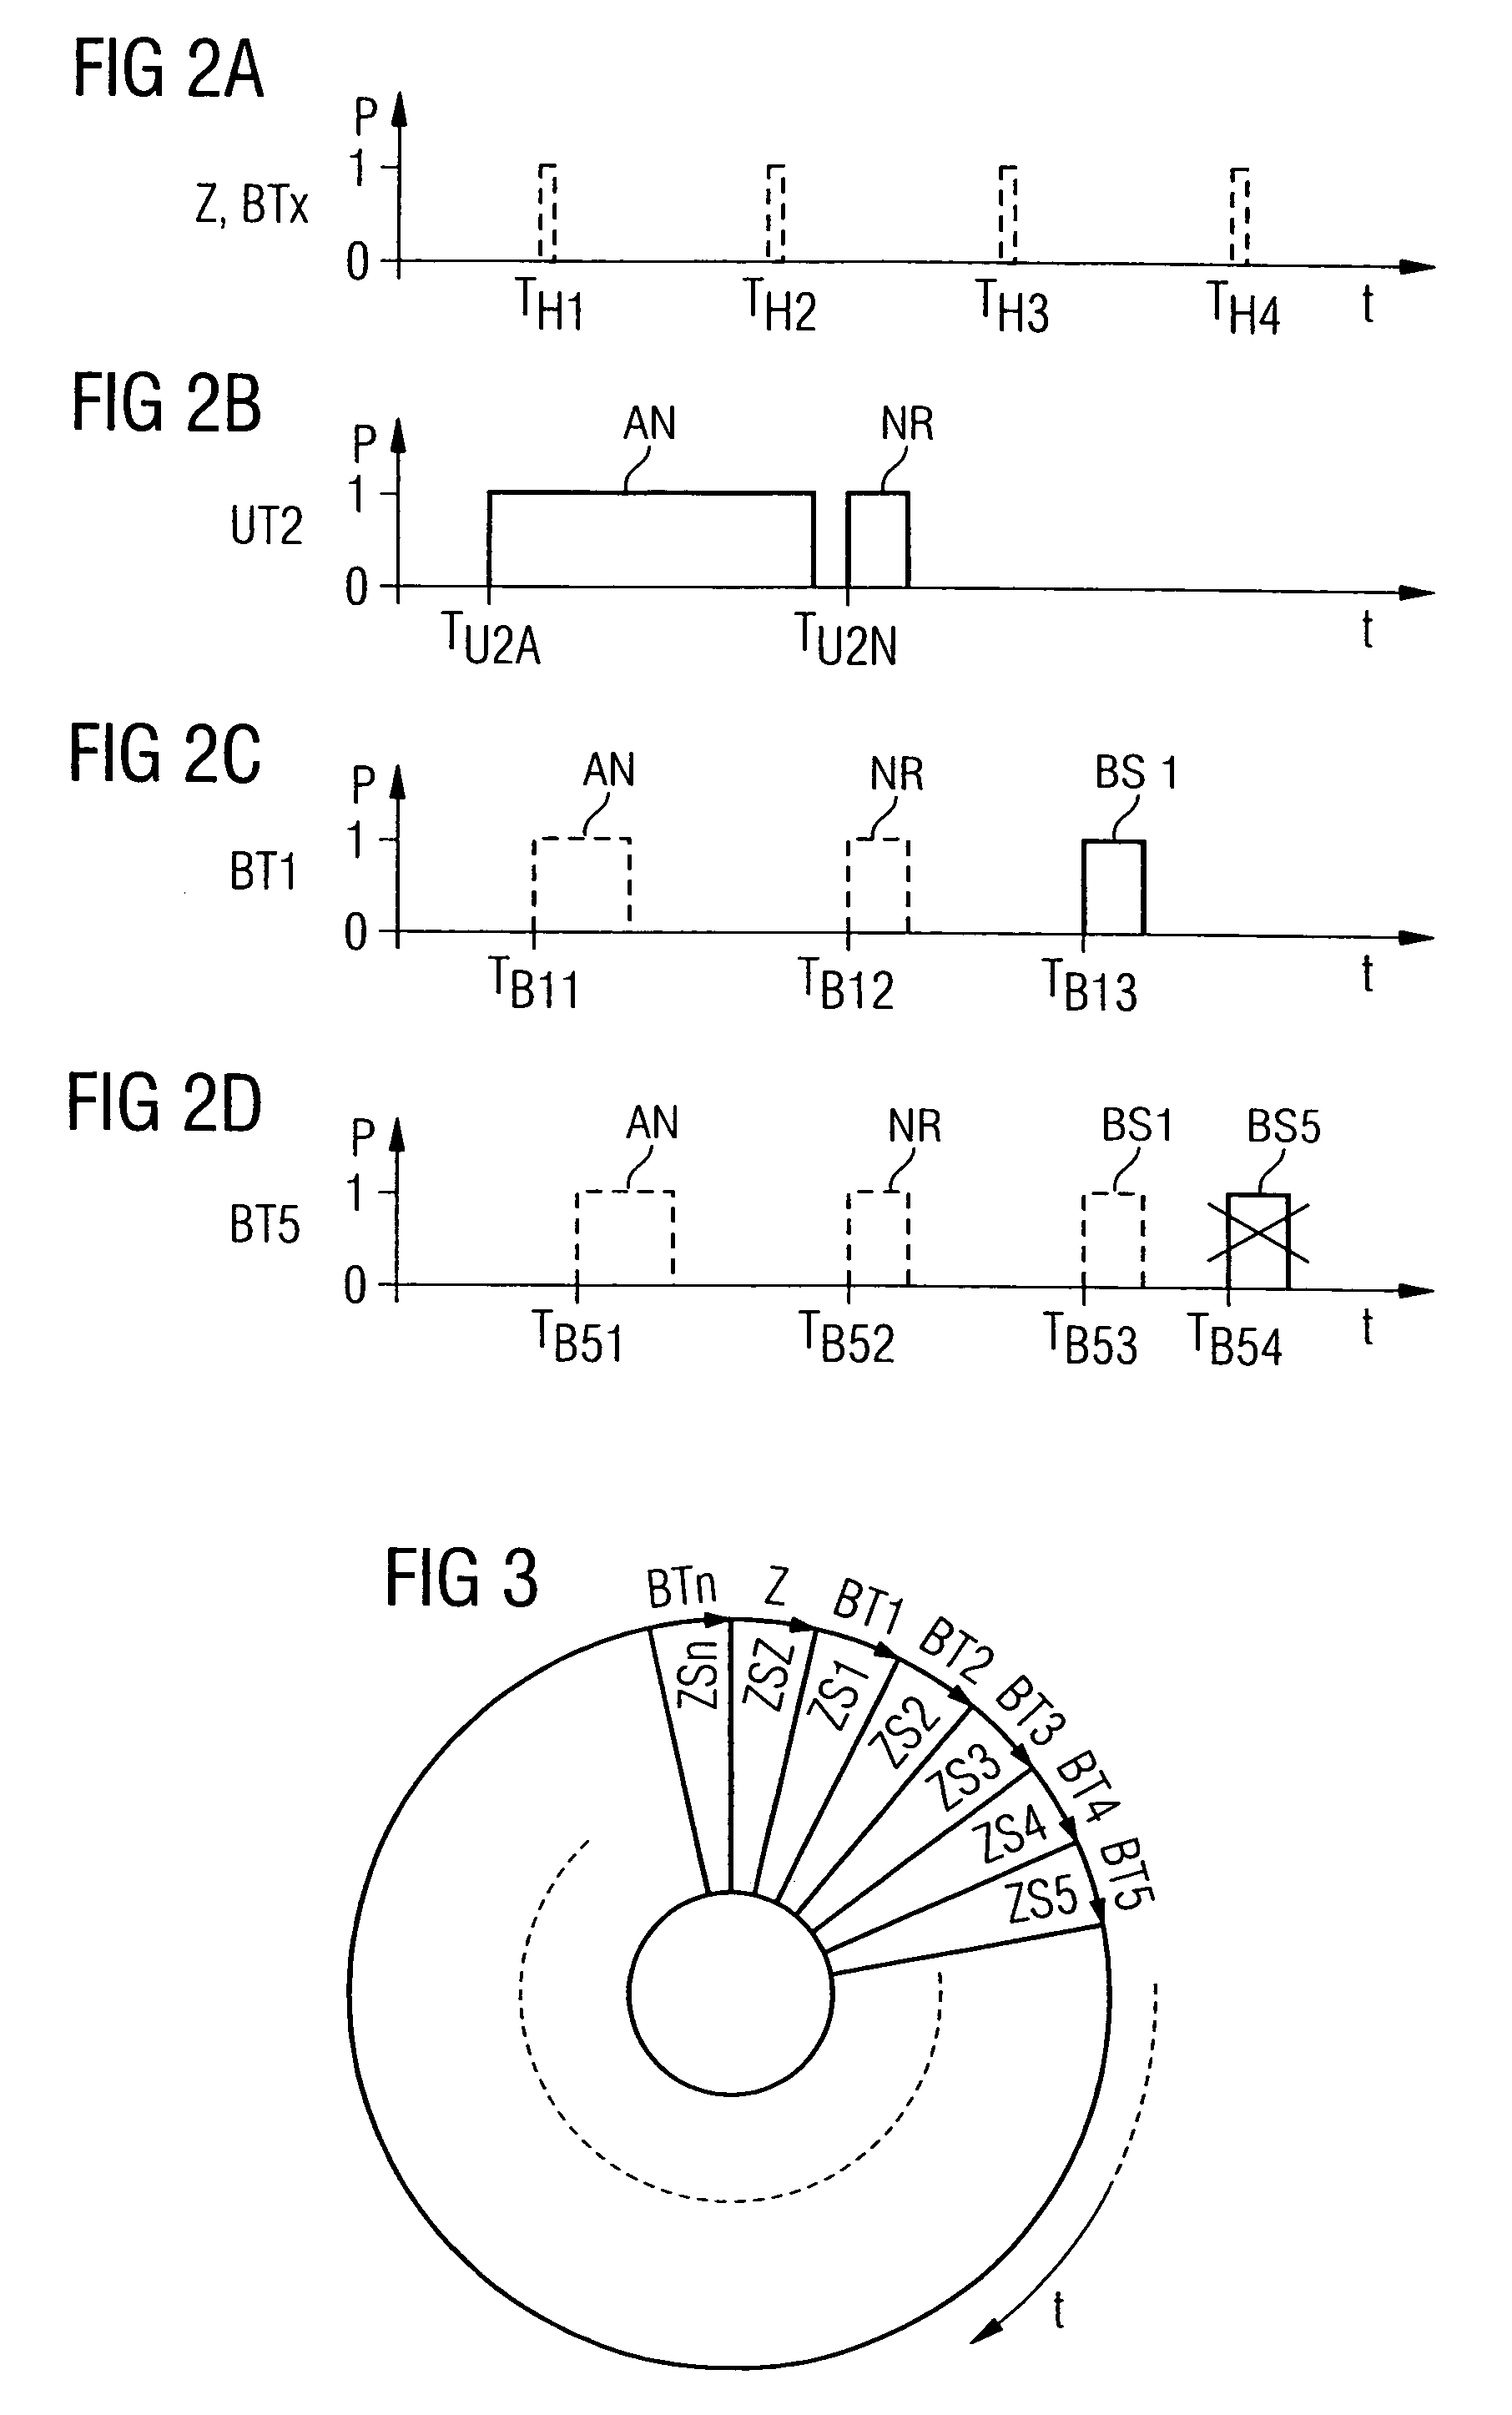 Method for radio transmission in an alarm signaling system